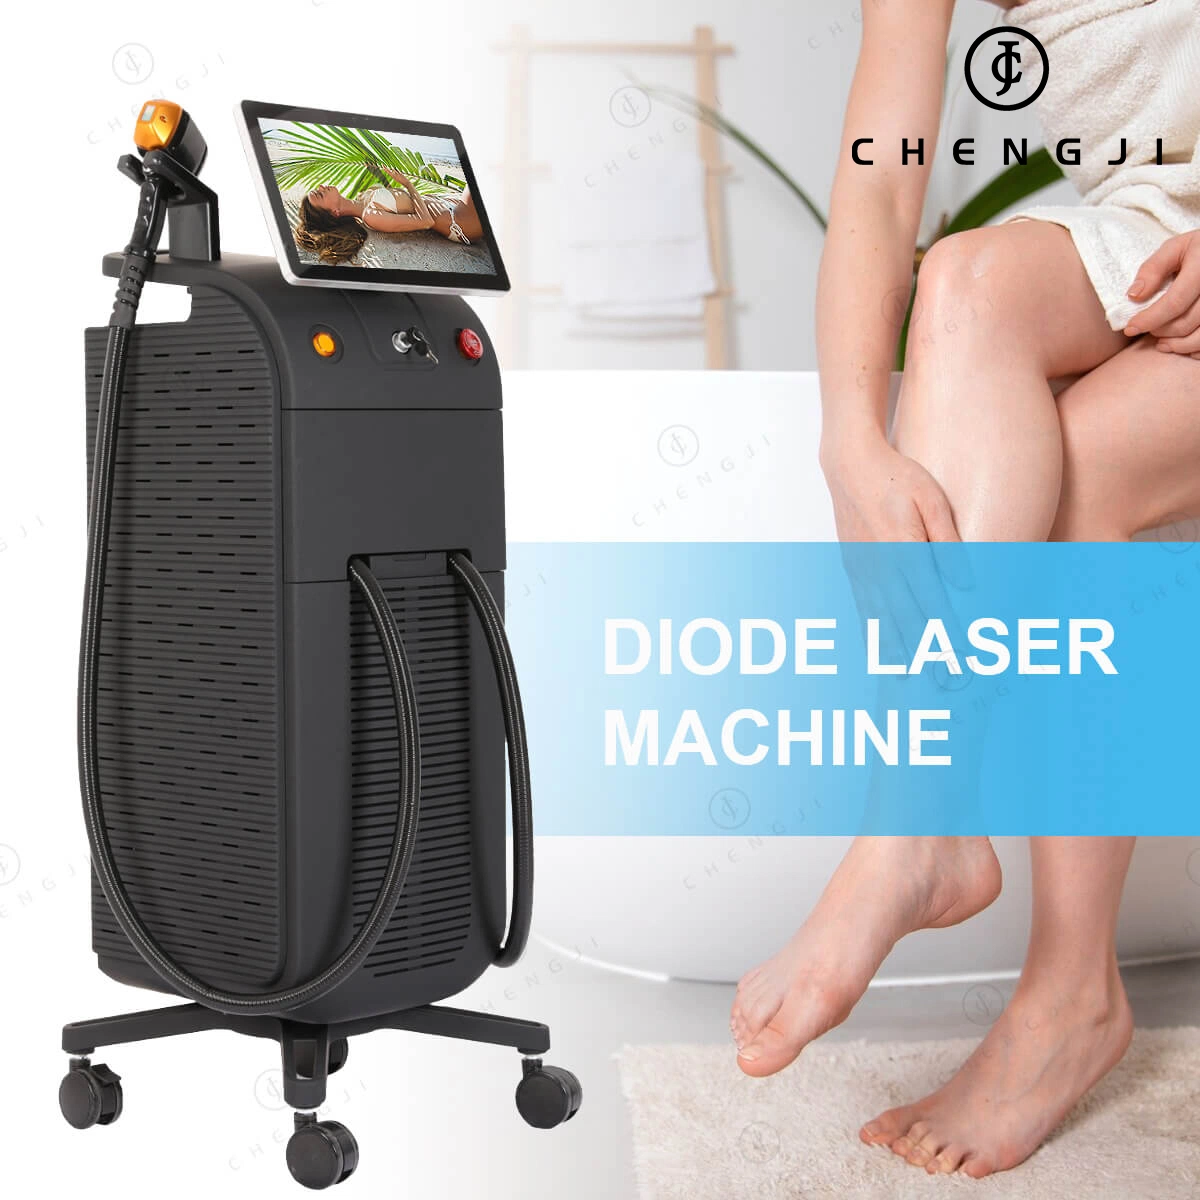 New 4K Screen Laser Hair Removal Diode Laser for Salon Color Touch Screen Larger Image Add to Compare Share Ice Titanium